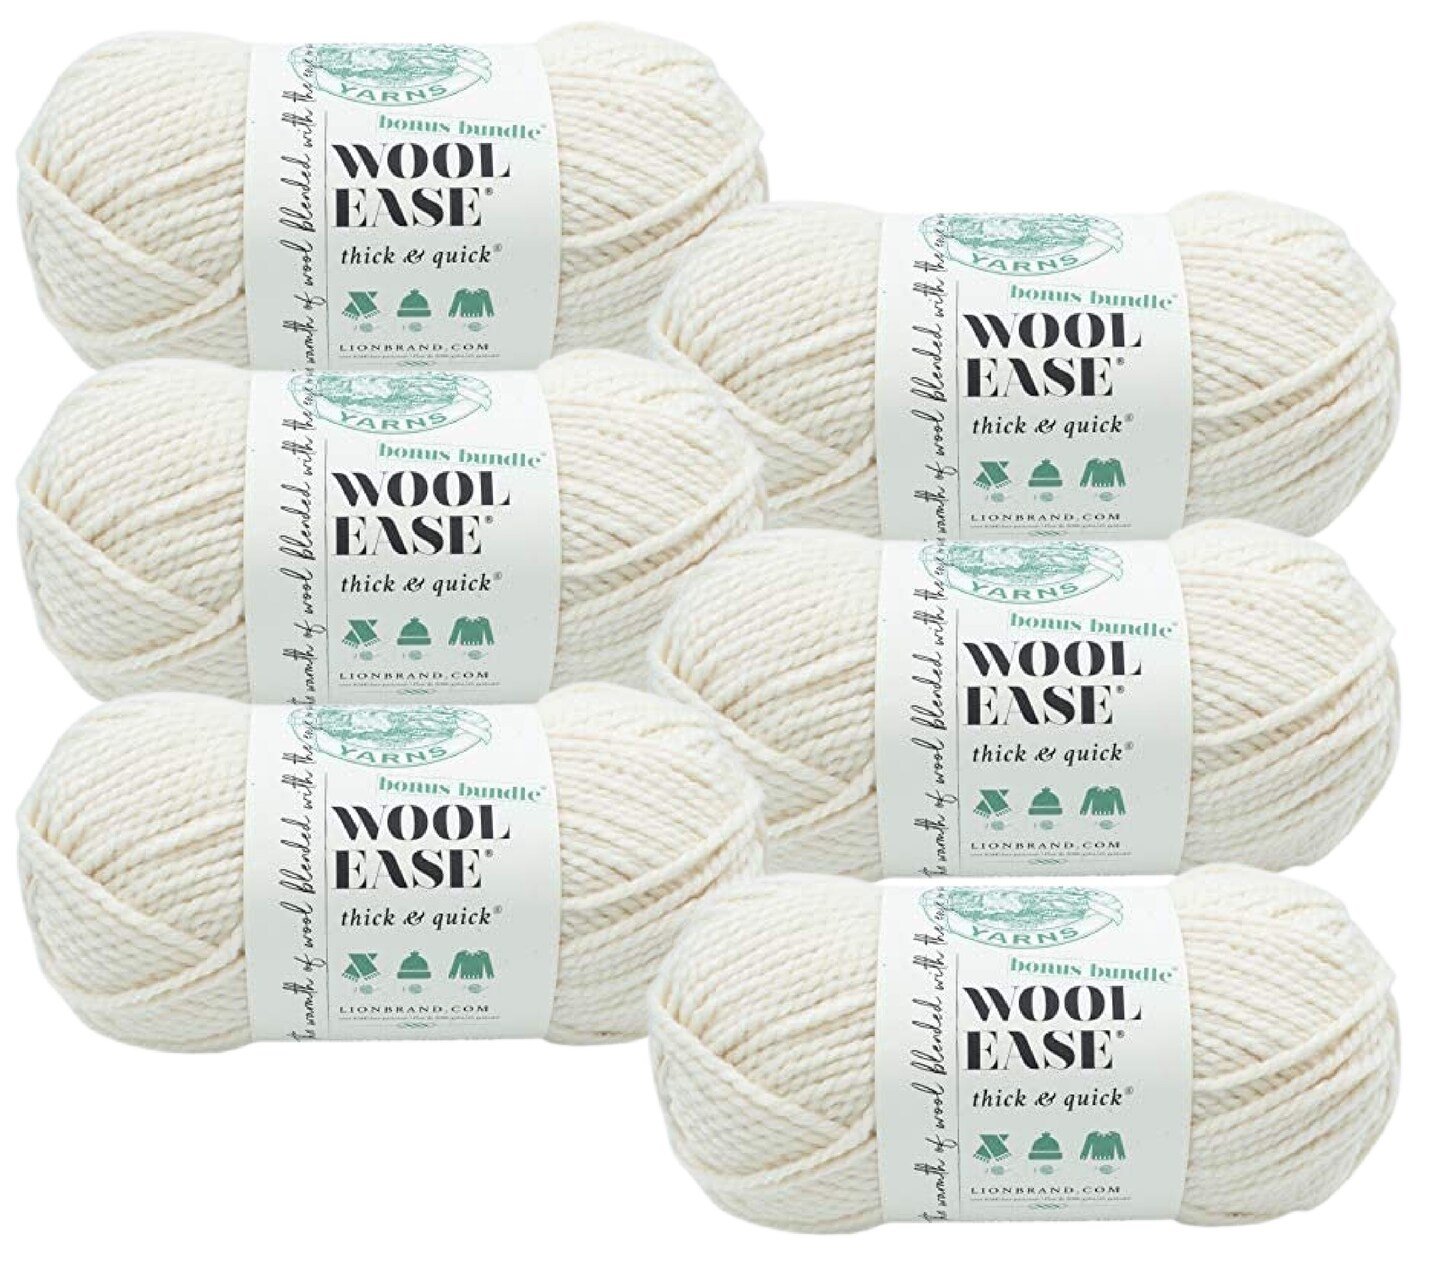 Lion Brand Wool-Ease Thick and Quick Yarn - 6 Pack (Fisherman)